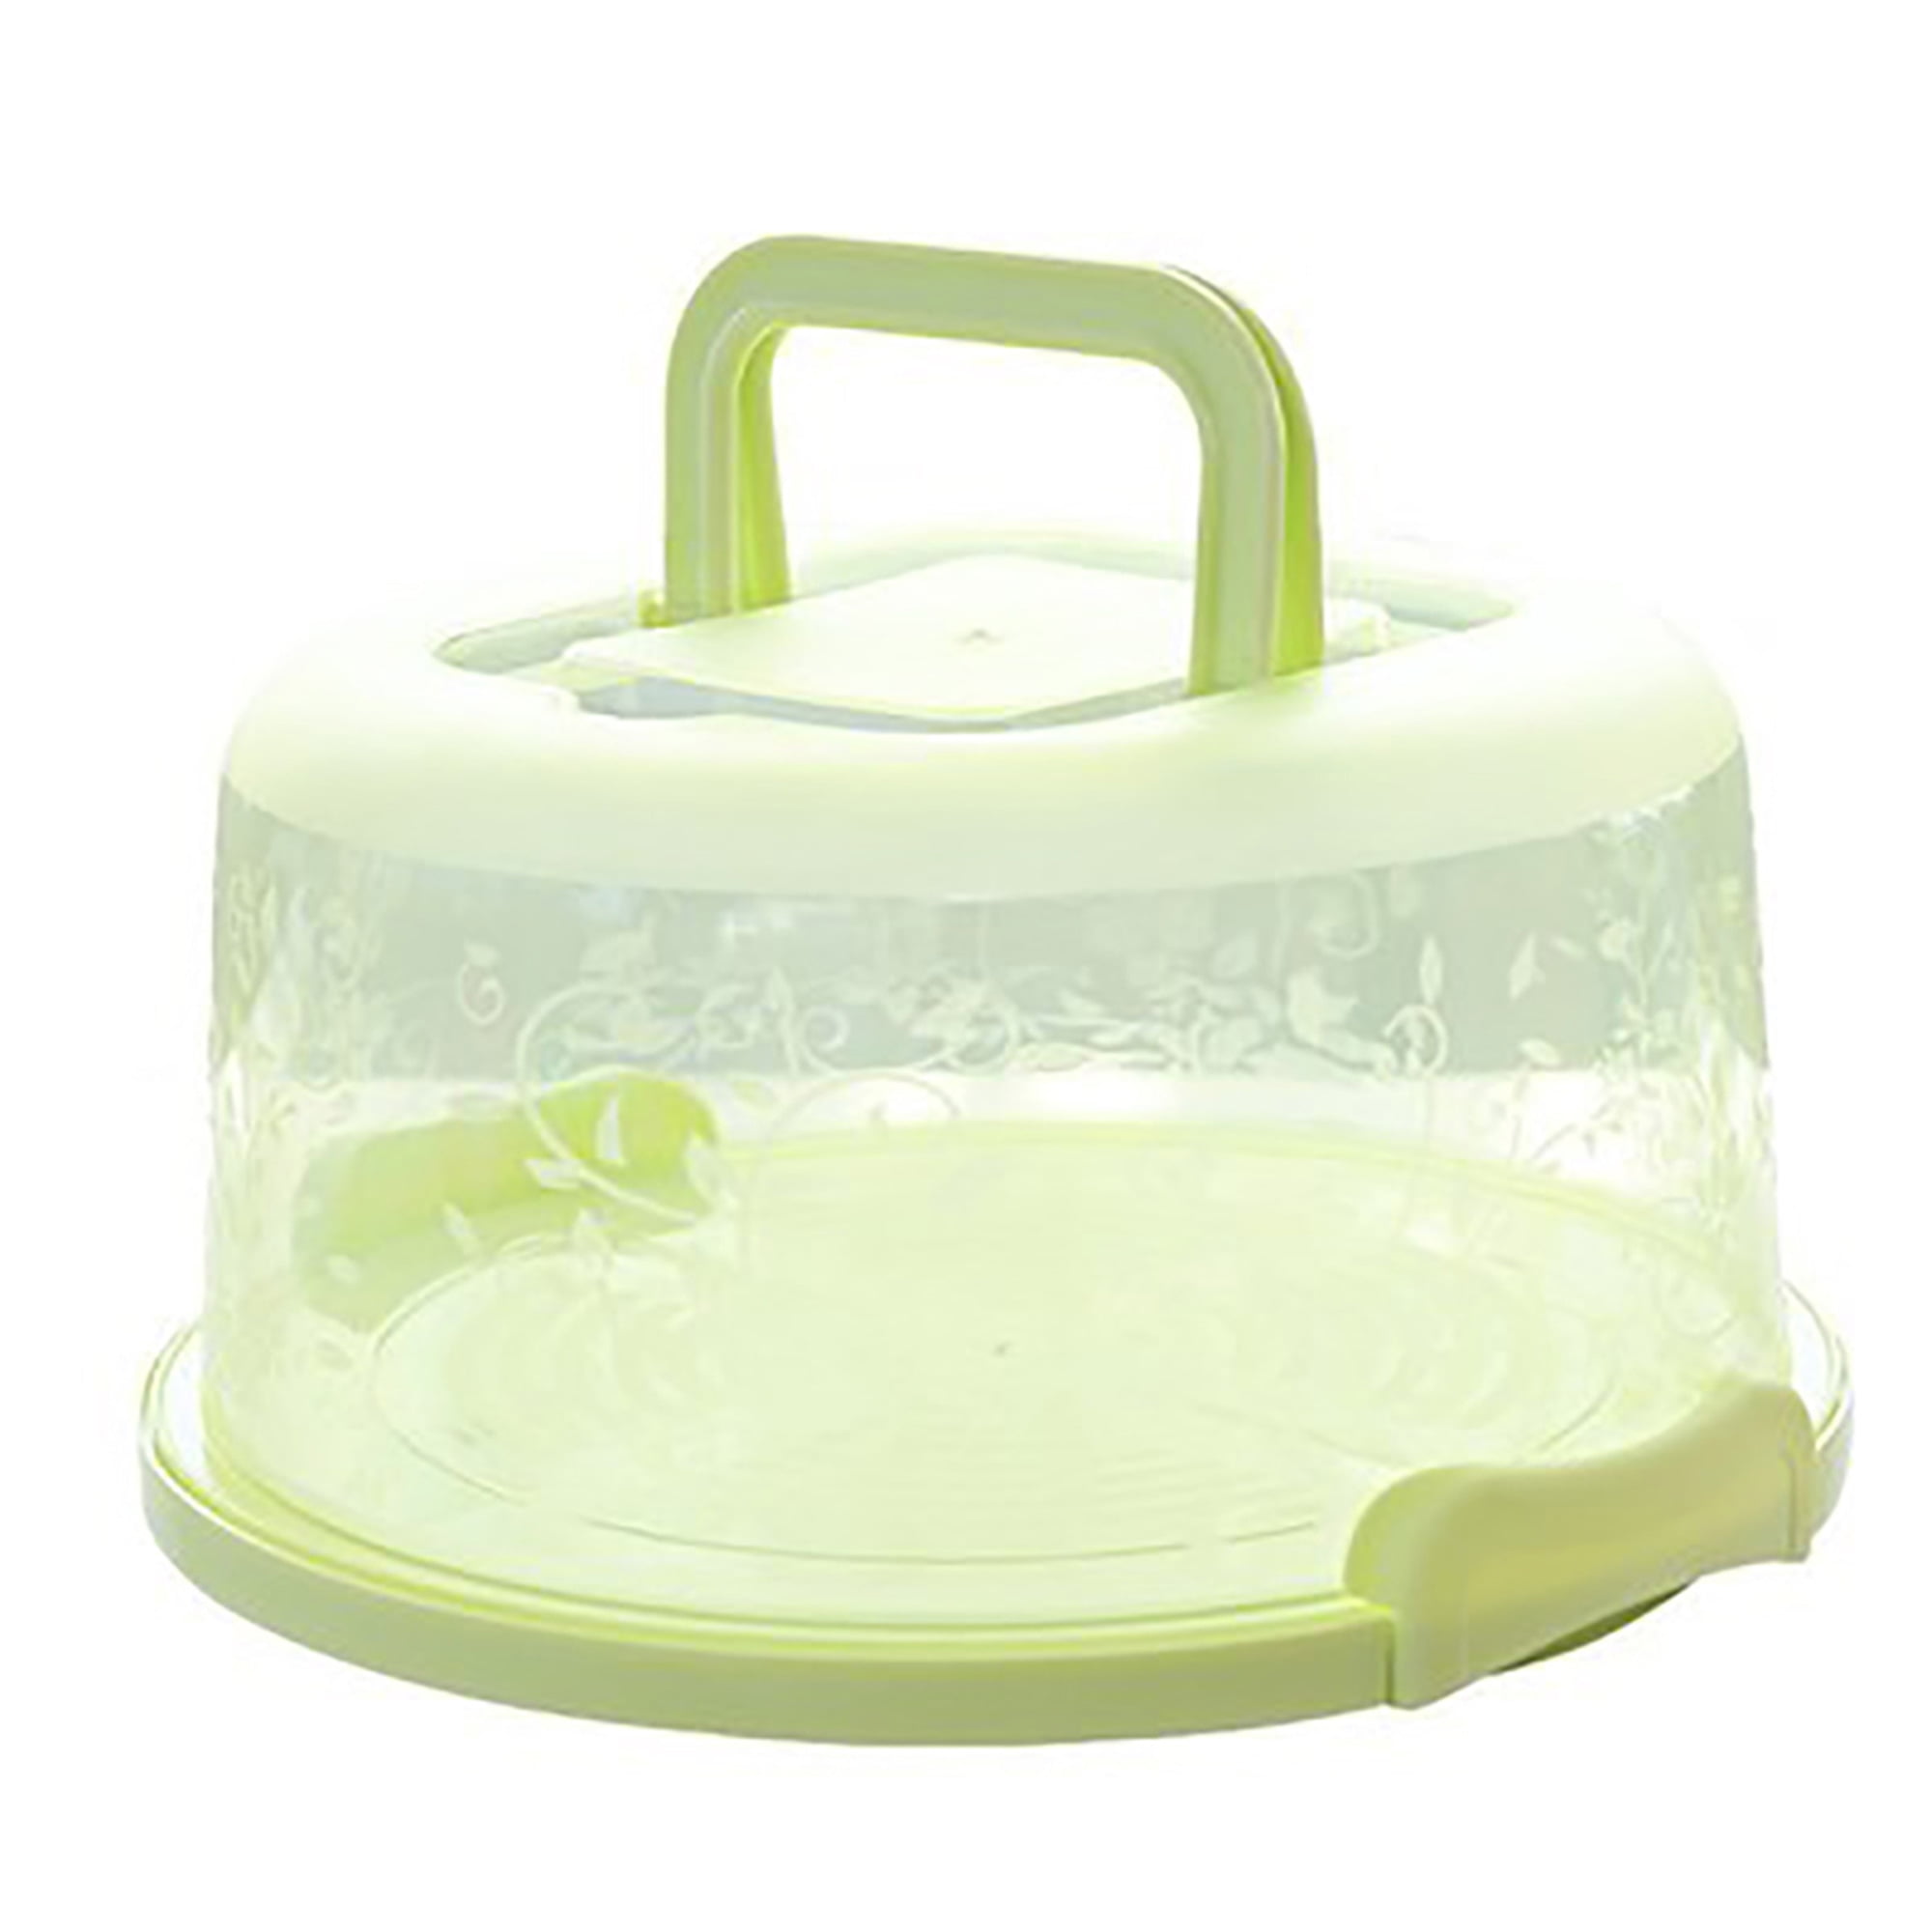 Portable Cake Carrier with Handle Plastic Cake Container Holder with Lid 